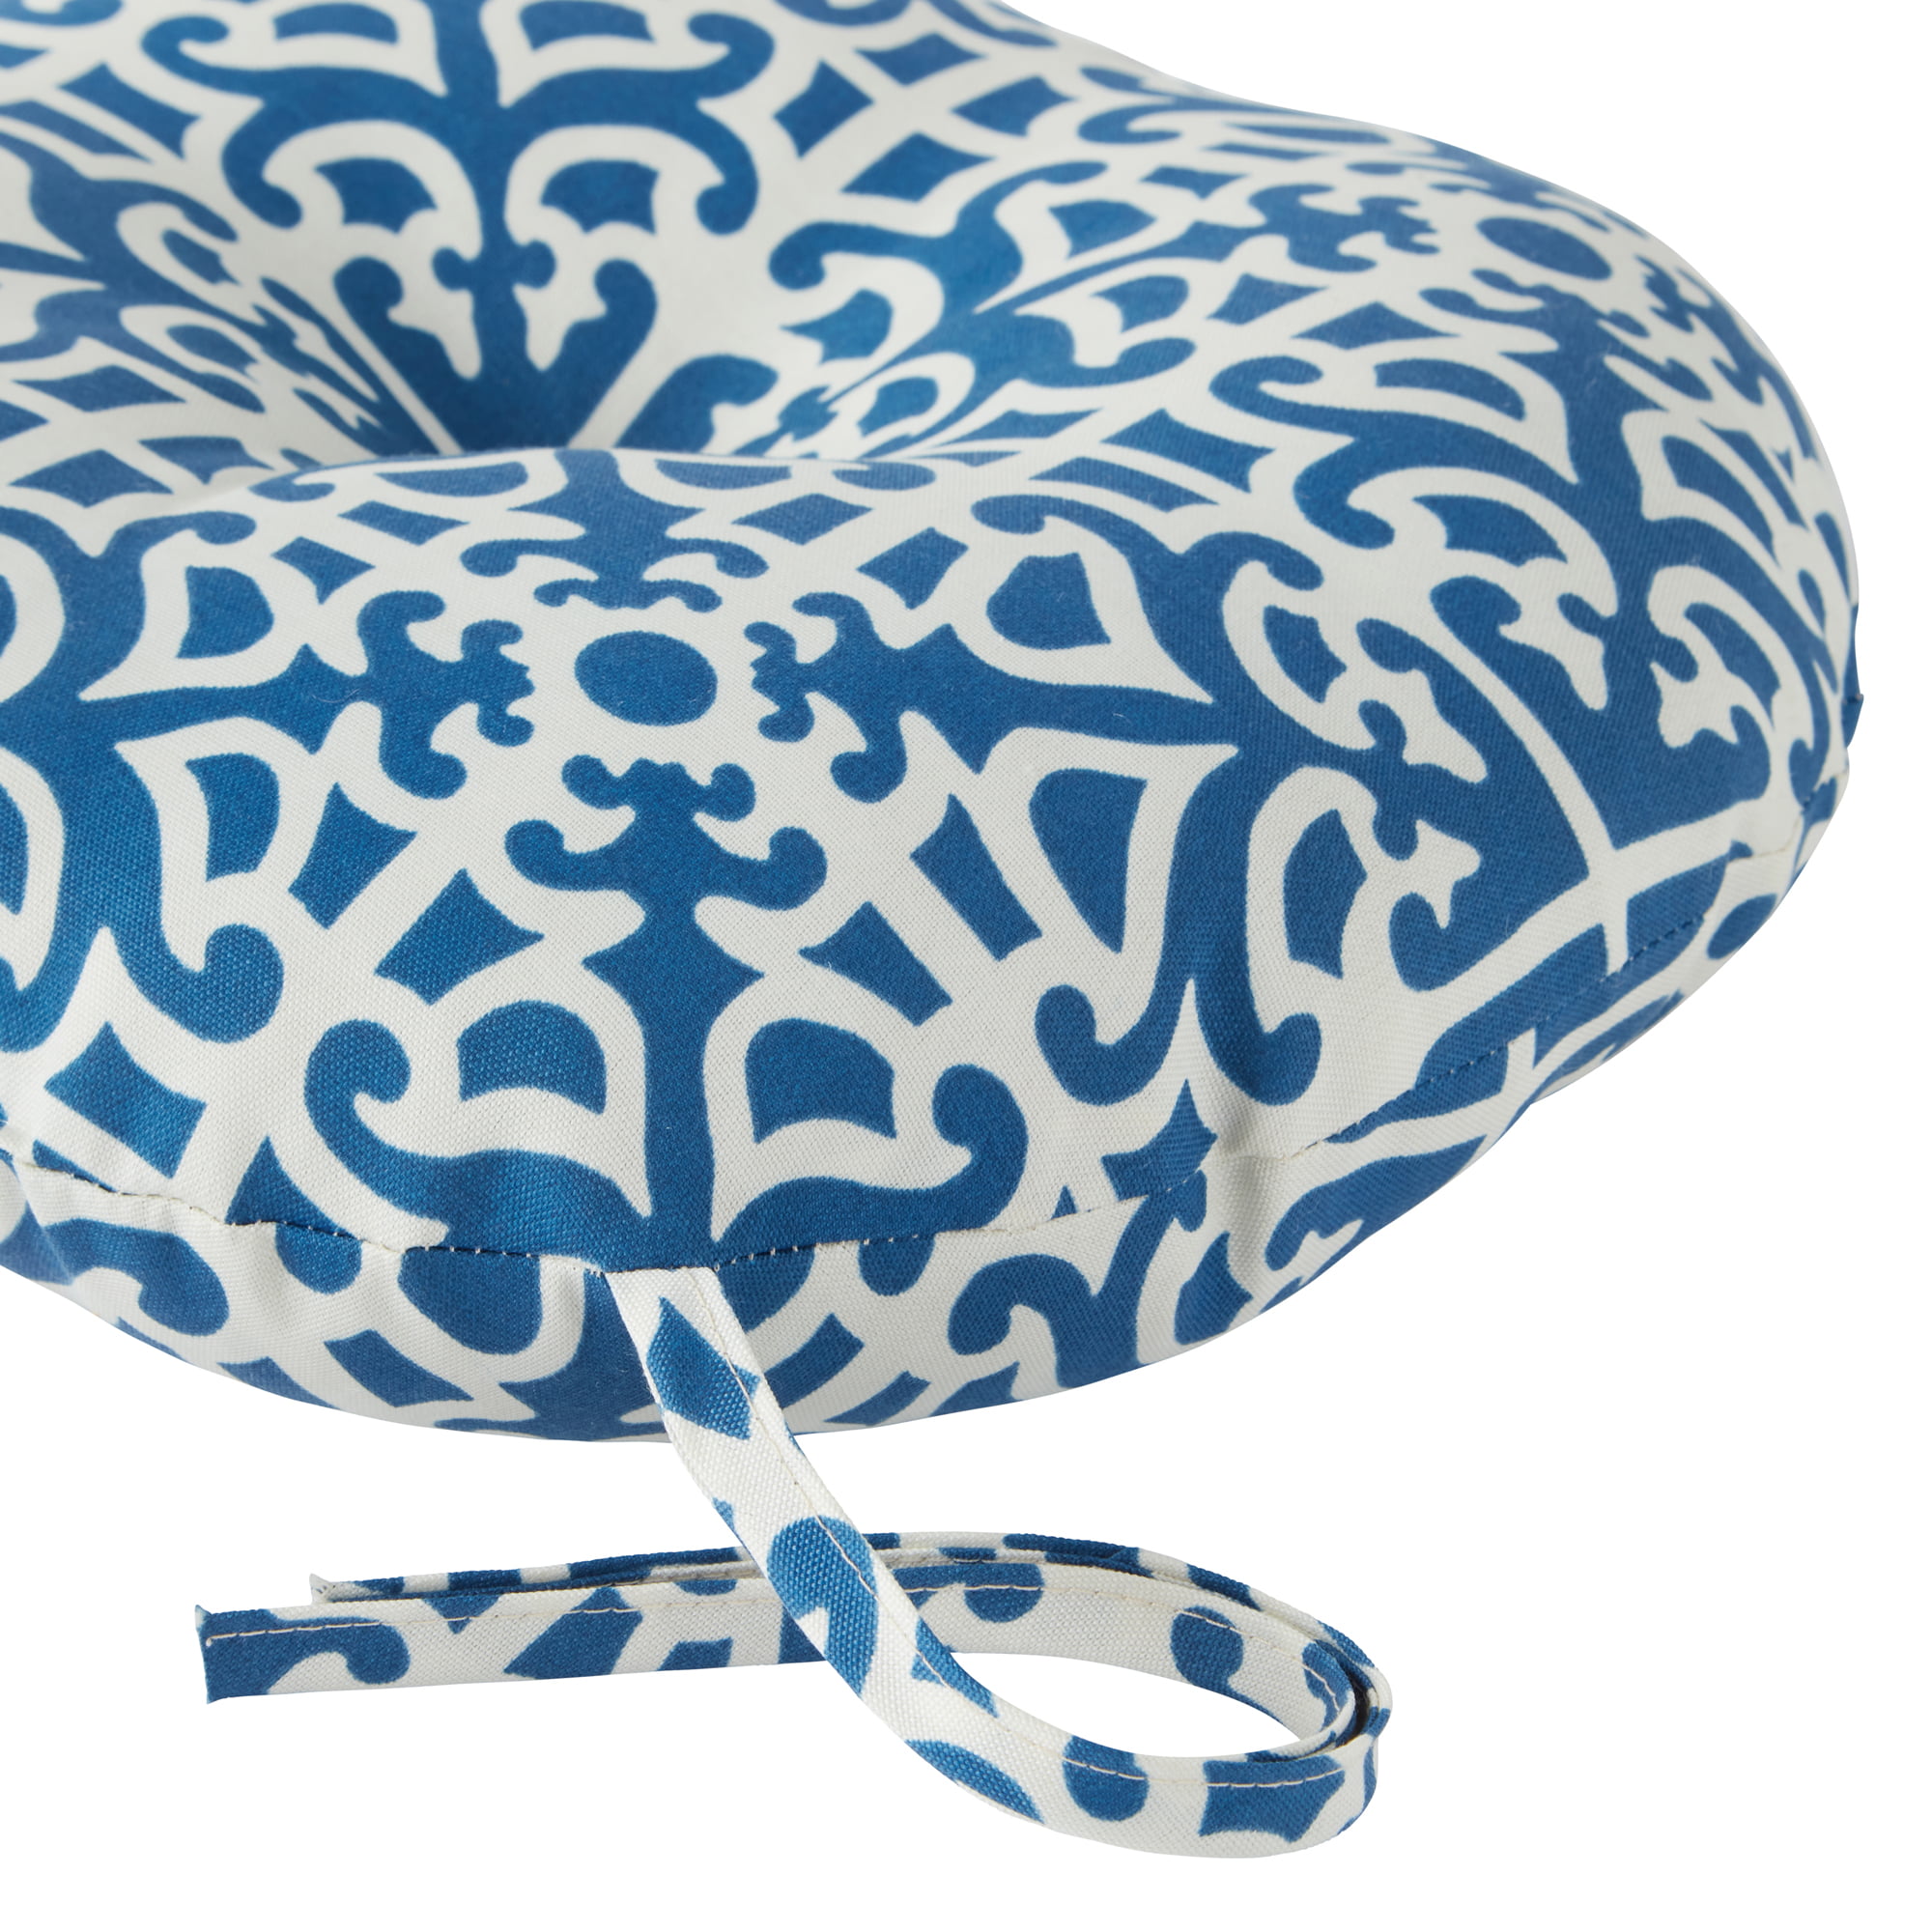 Greendale Home Fashions Indigo Lattice 15 in. Round Outdoor Reversible Bistro Seat Cushion (Set of 2) - image 4 of 6